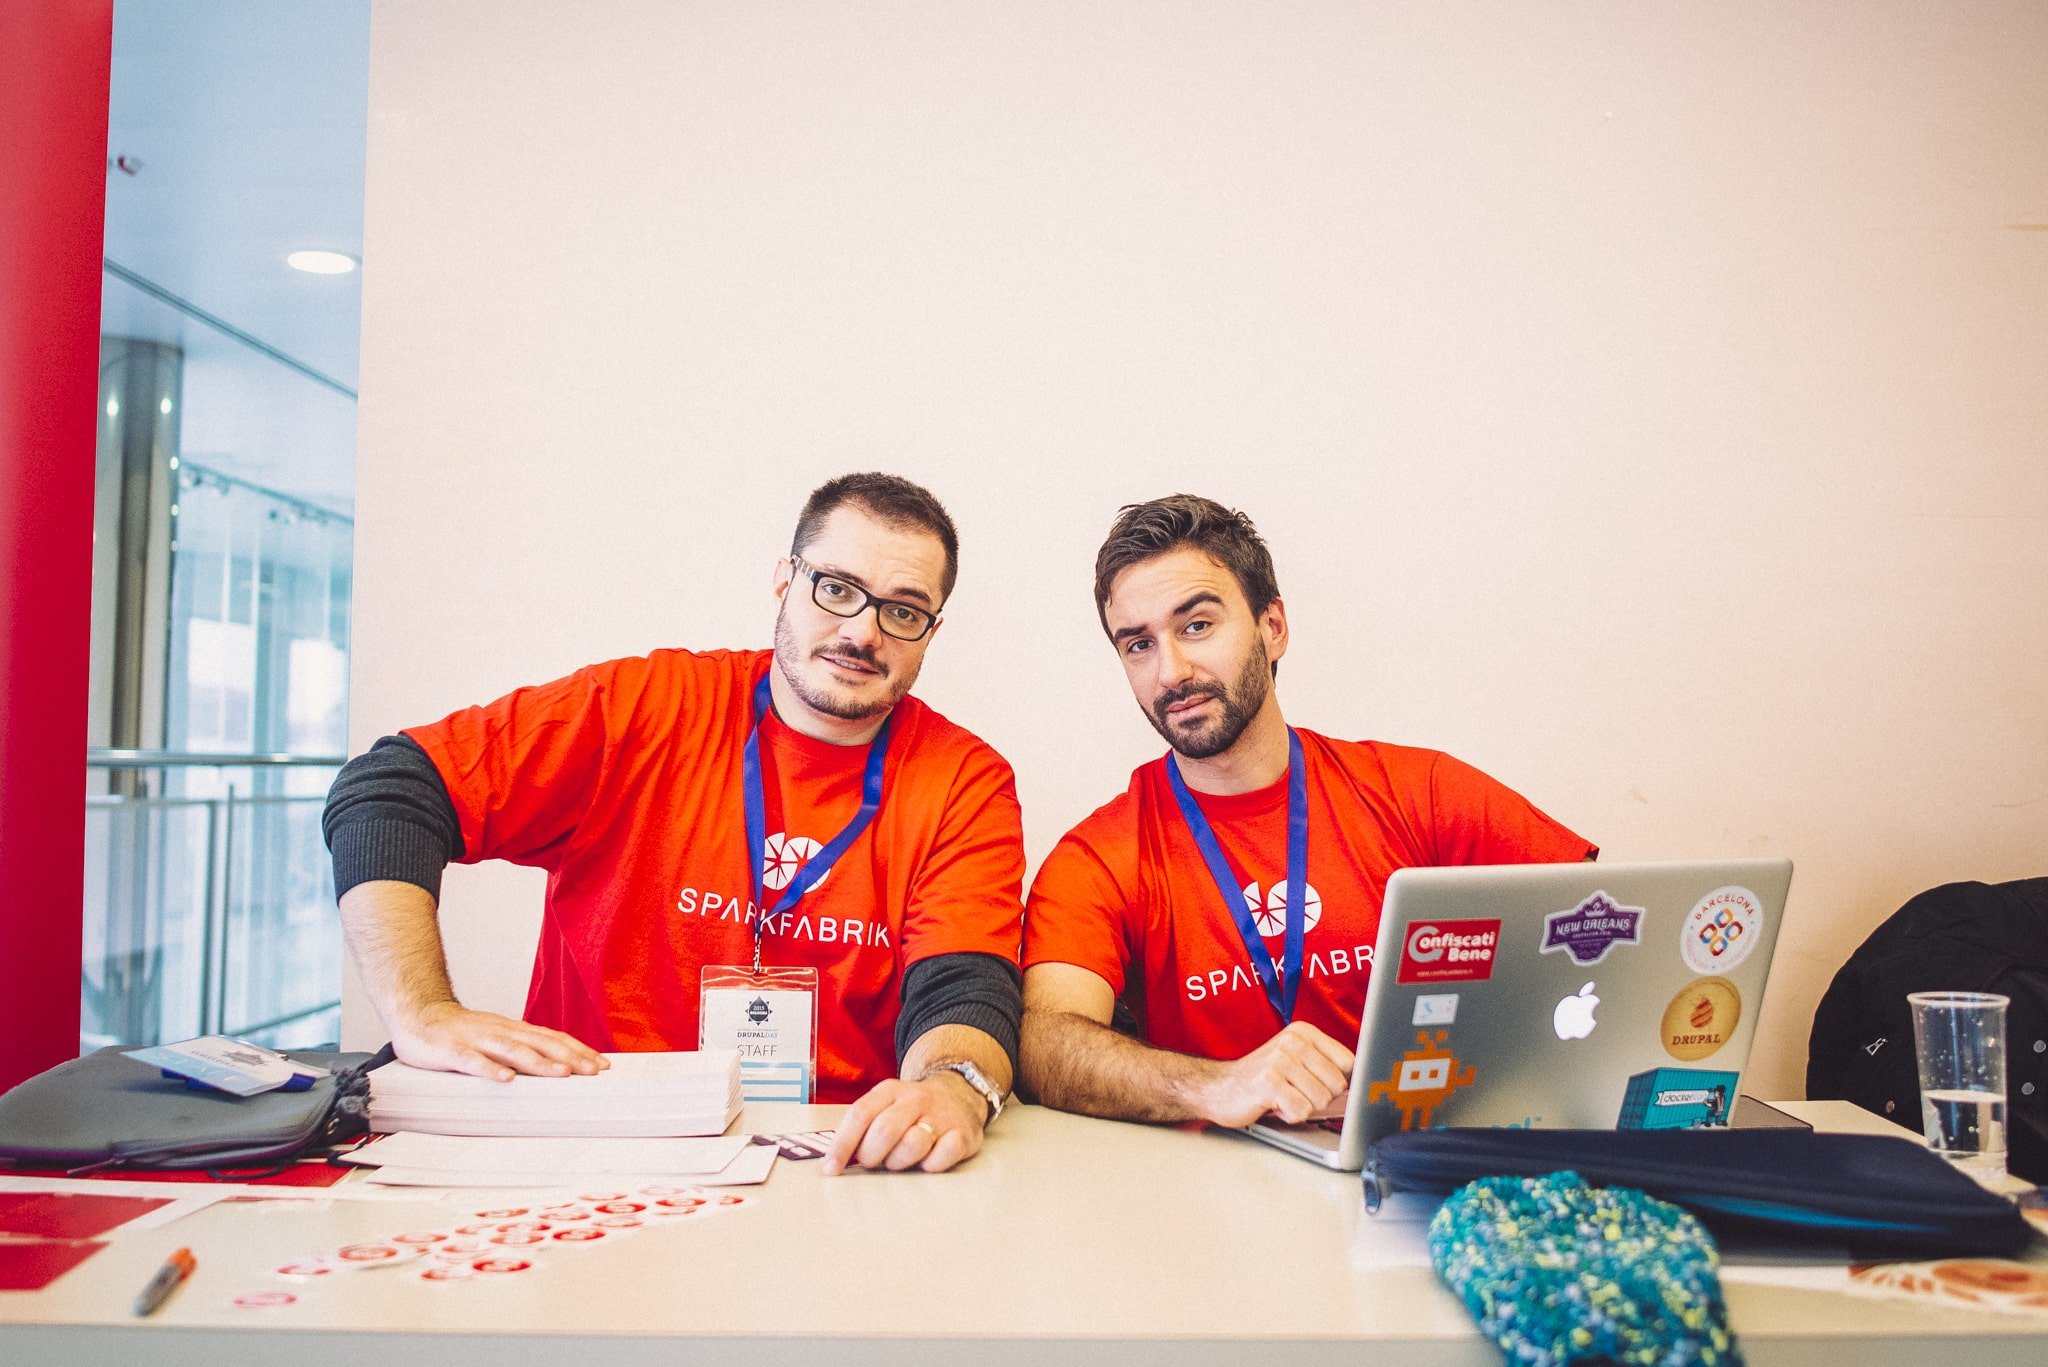 DrupalDay 2017 in Rome, co-organized by SparkFabrik | In the picture,on the left Edoardo Dusi,DevRel of SparkFabrik and on the right Paolo Mainardi CTO of SparkFabrik